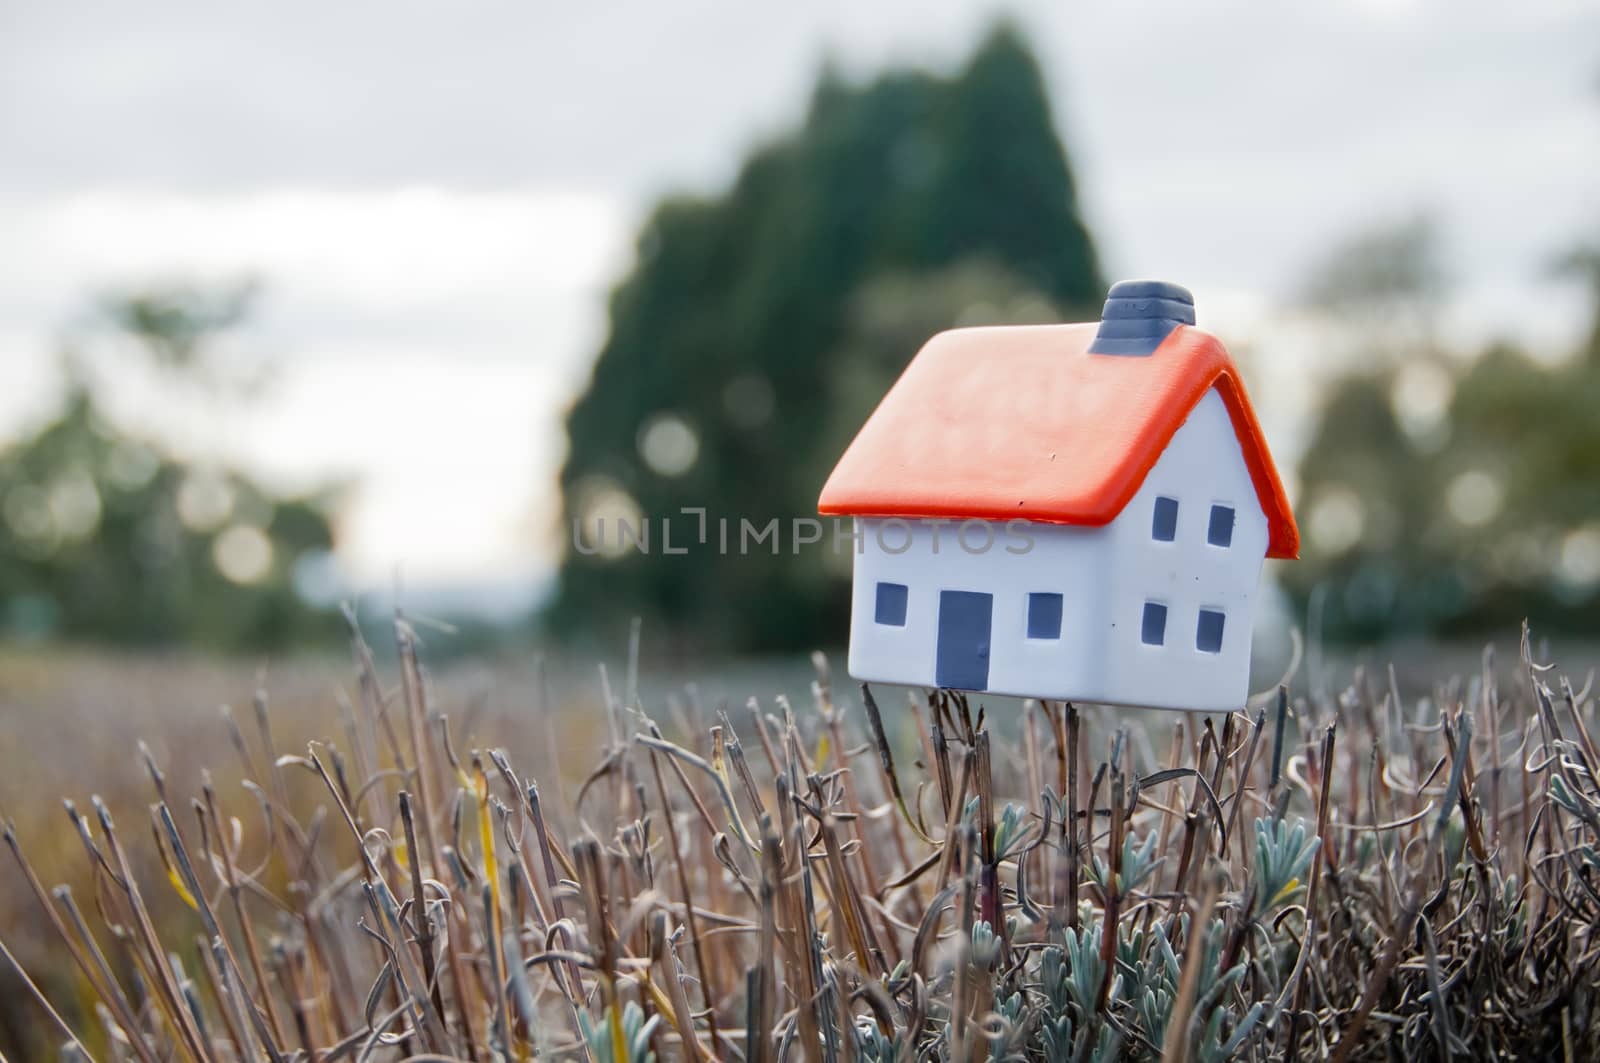 Small soft miniature toy house placed on lavender branch in farm by eyeofpaul